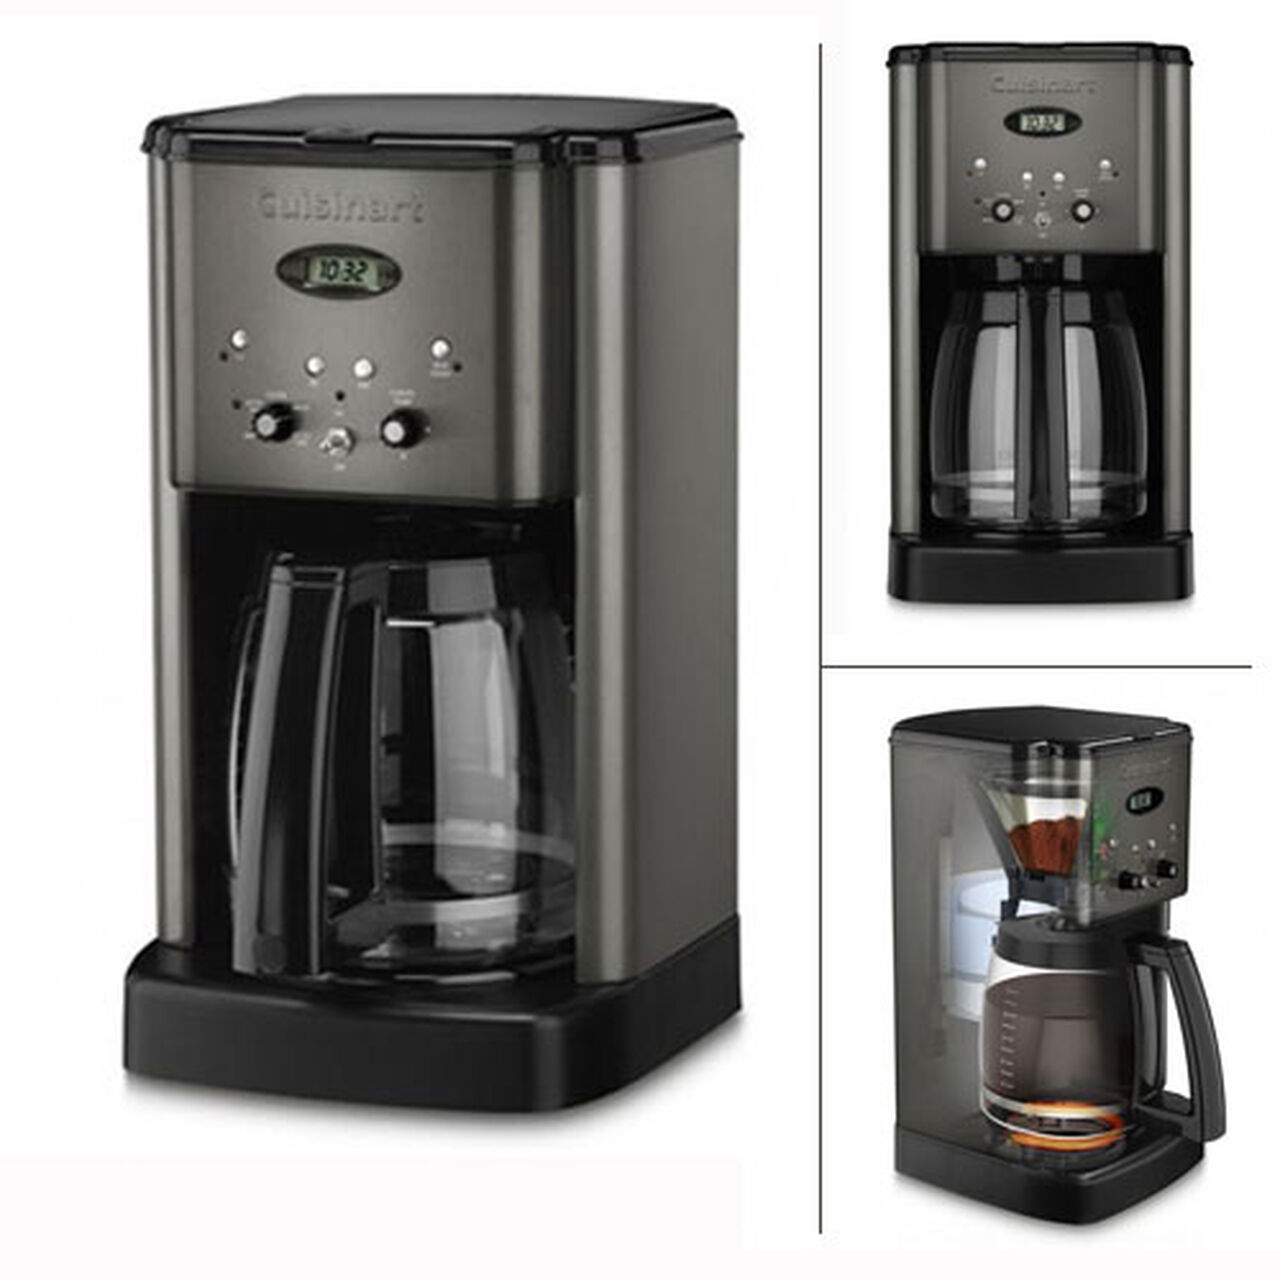 Cuisinart 12-Cup Stainless Steel Drip Coffee Maker in the Coffee